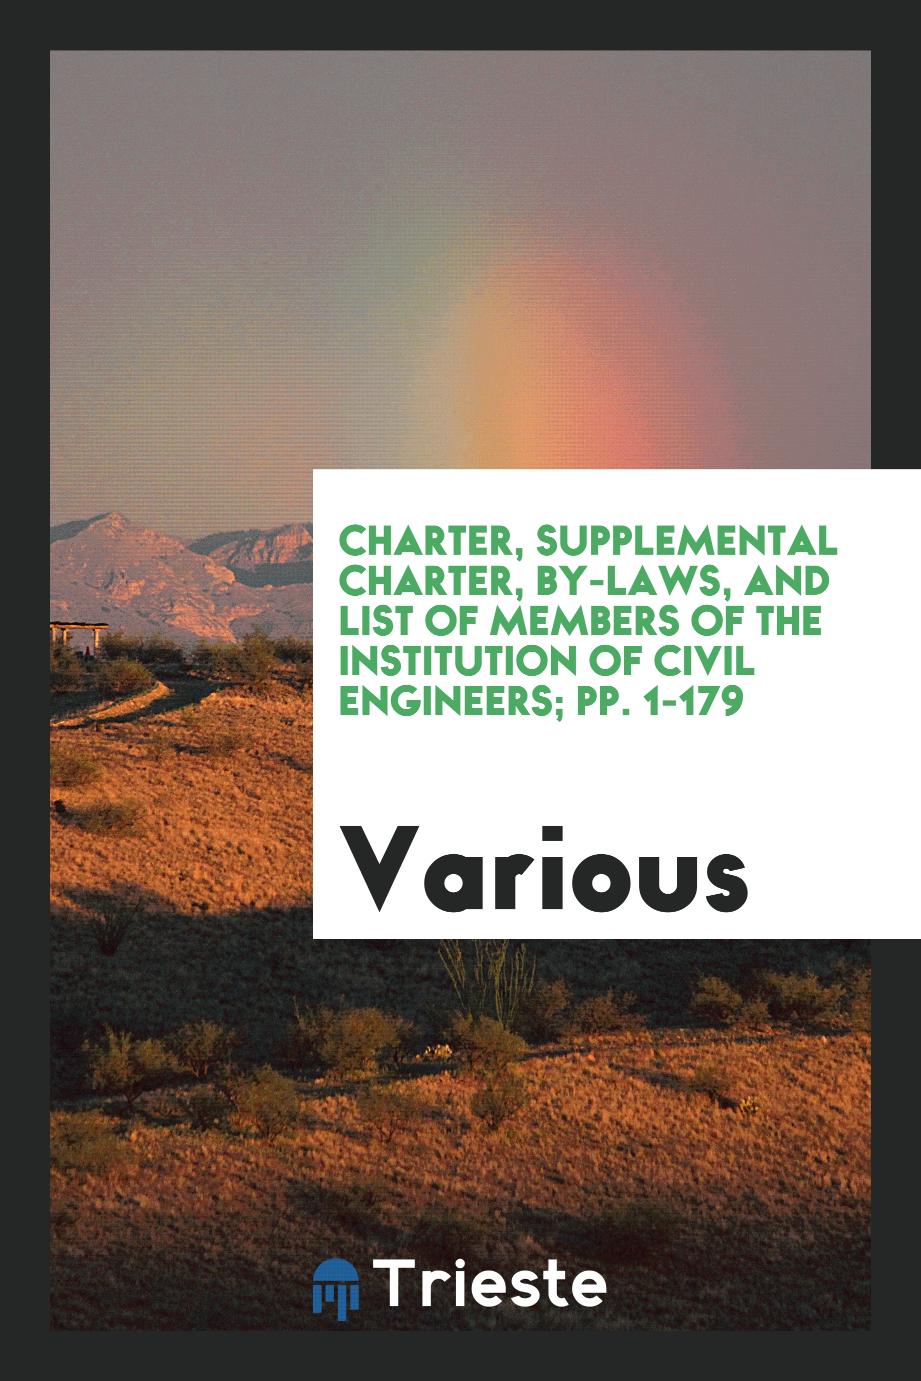 Charter, Supplemental Charter, By-Laws, and List of Members of the Institution of Civil Engineers; pp. 1-179